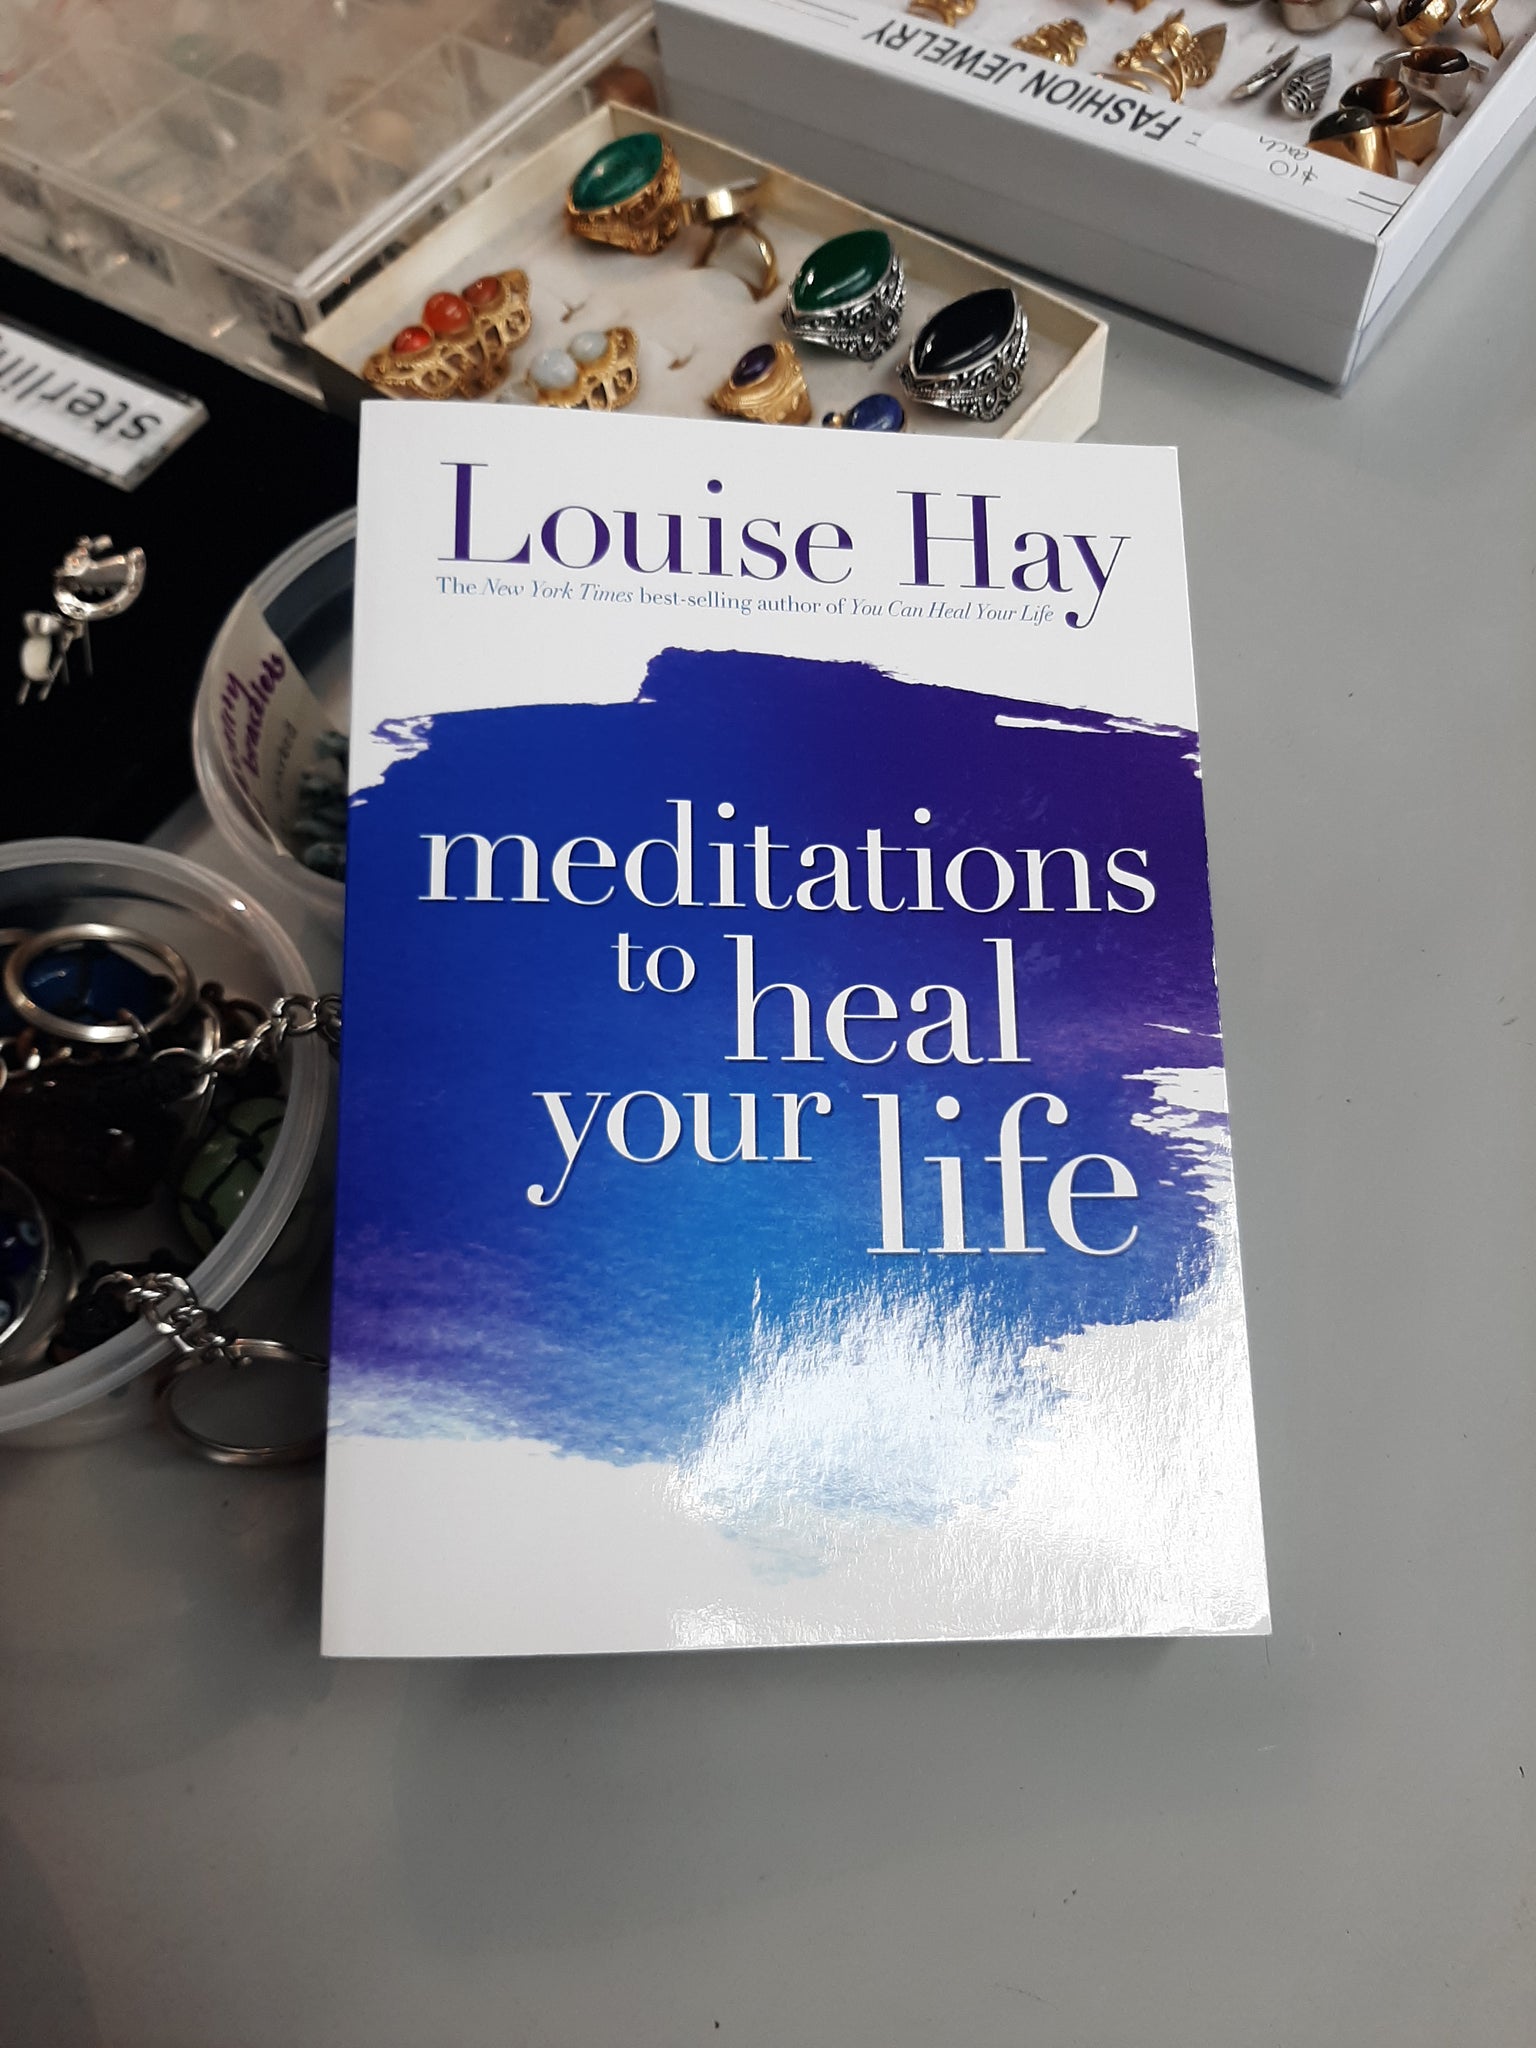 Meditations to heal your life